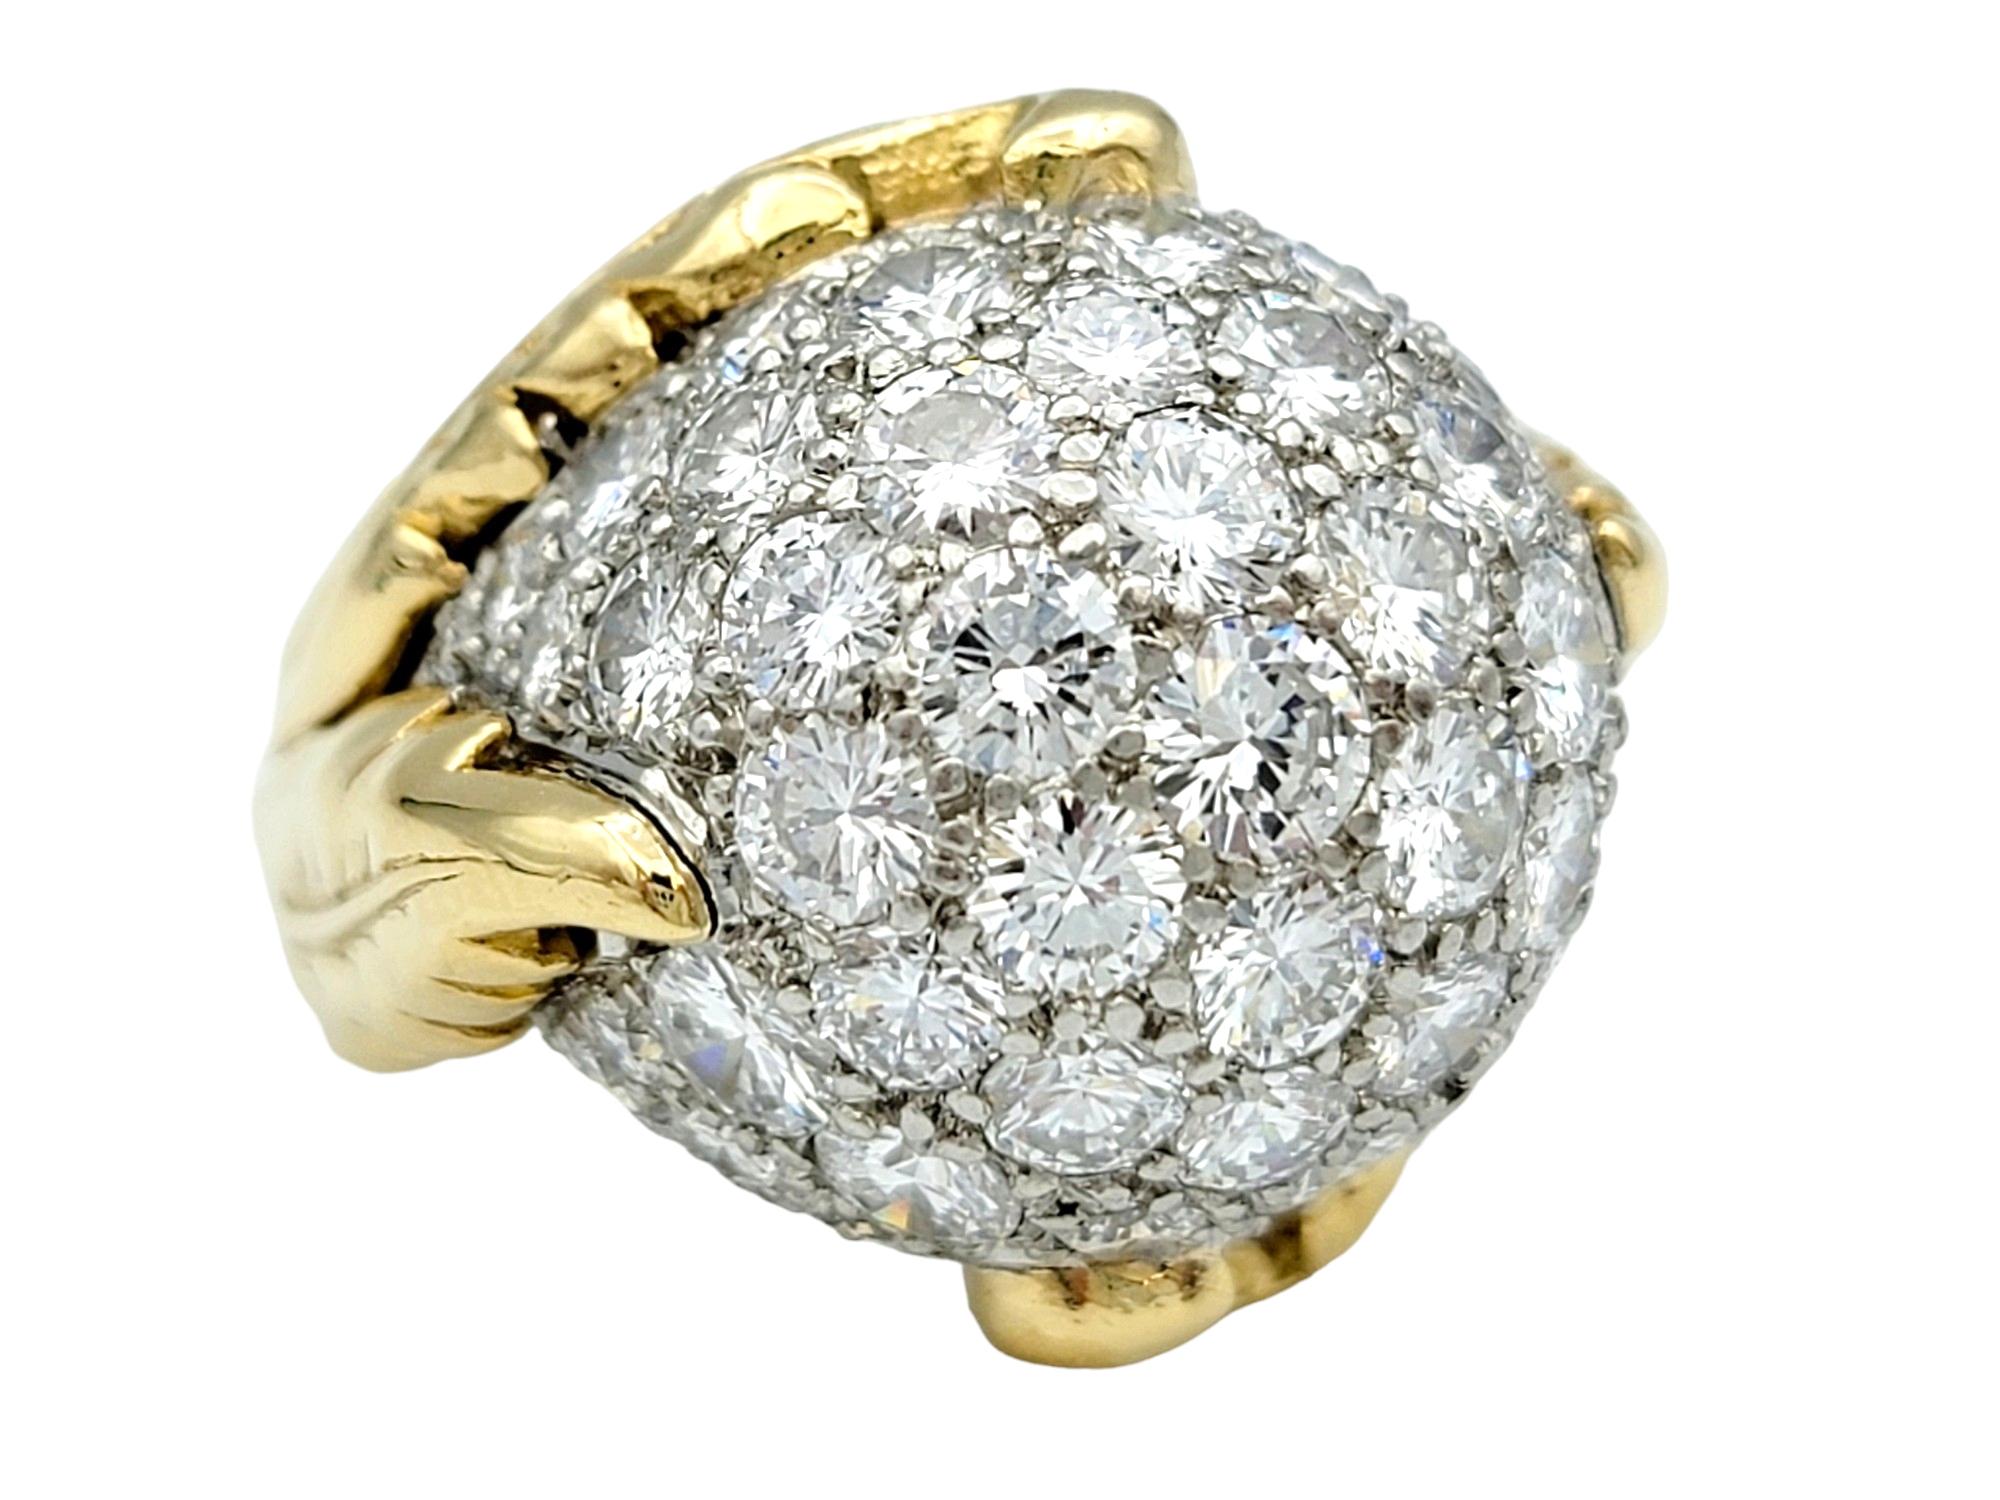 Ring Size: 6.5

This beautiful diamond-encrusted dome ring, set in lustrous 18 karat yellow gold, is a magnificent testament to luxury and opulence. At its center sits a resplendent spherical ornament, adorned with a breathtaking array of sparkling